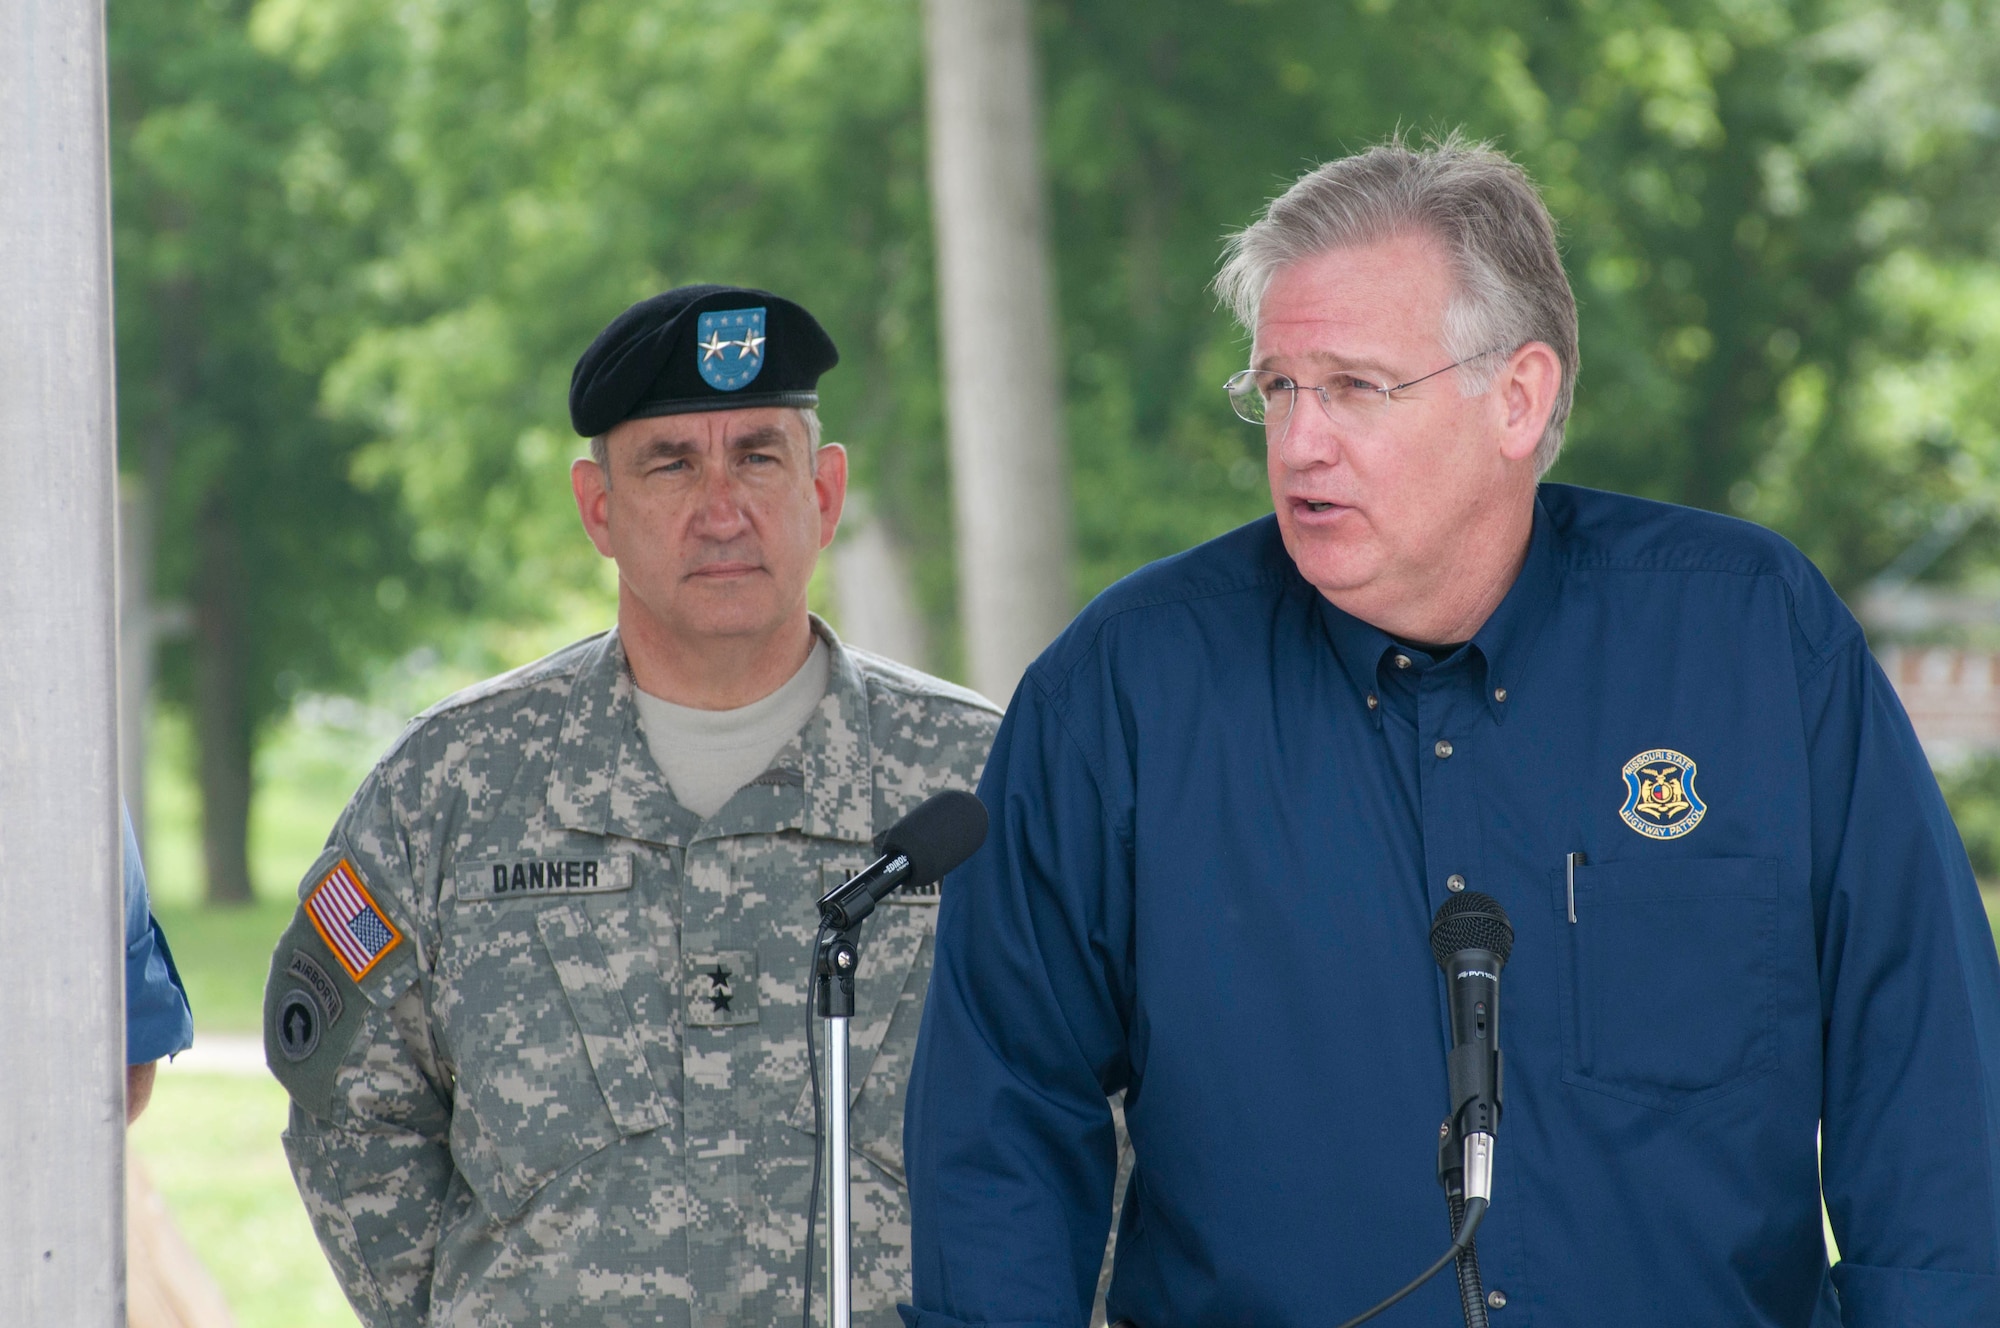 Missouri Governor Jay Nixon addresses concerns about potential flooding, as Missouri Adjutant General Stephen Danner looks on at a news conference in St. Joseph, Mo., June 2, 2011. The Missouri river is threatening to escape from its banks as citizens in the Northwest Missouri region brace for the possible flood. (U.S. Air Force photo by Master Sgt. Shannon Bond)